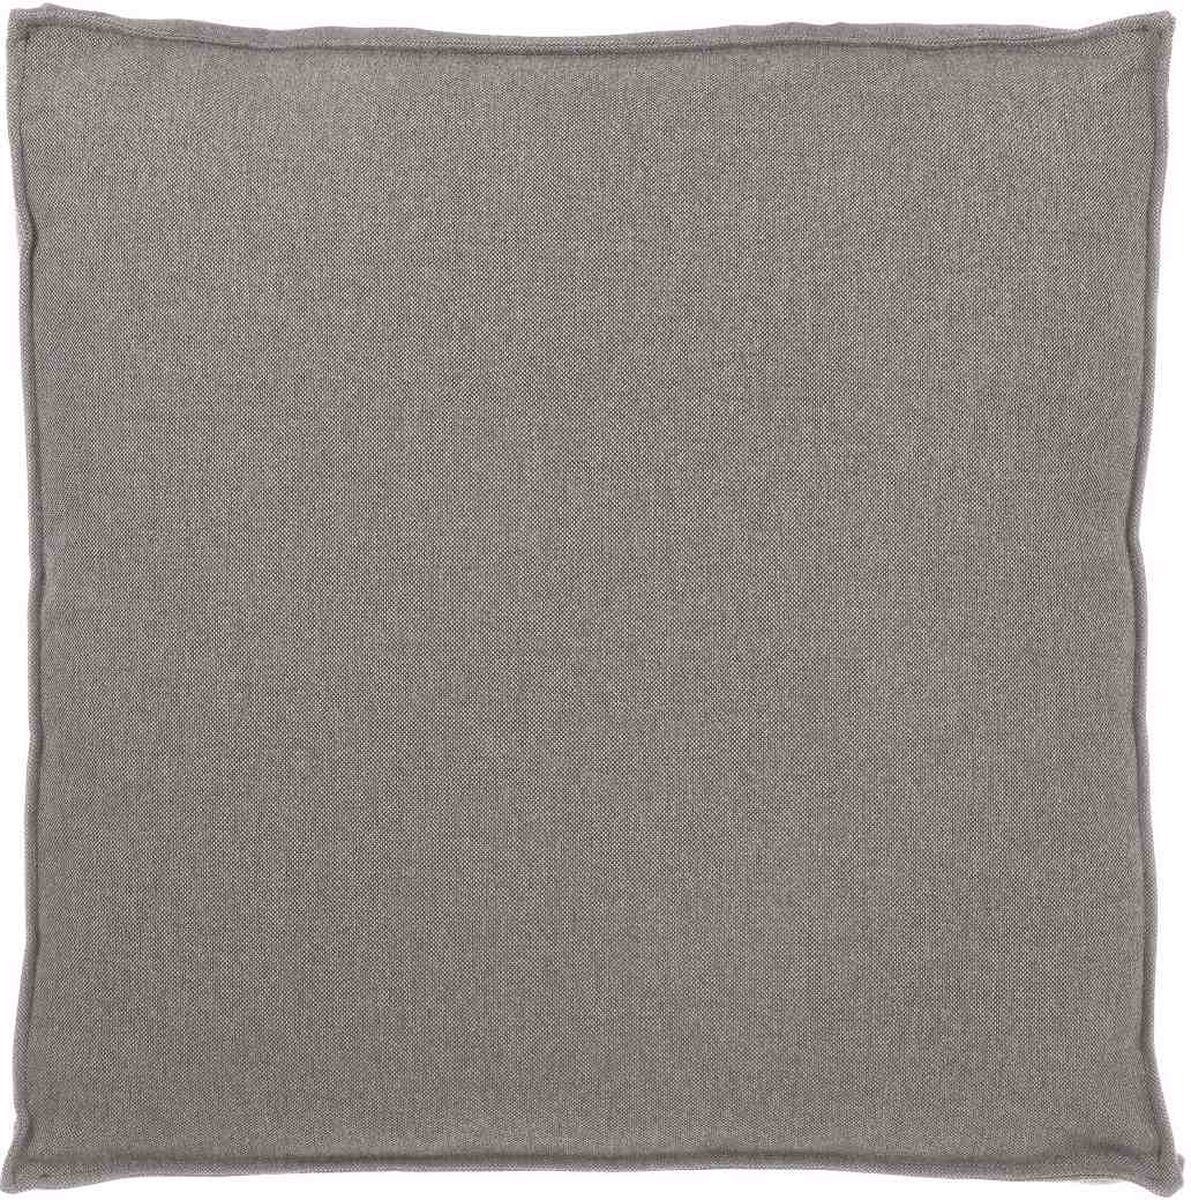 In the Mood Salvador Tuin Kussen - 80 x 80 cm - Polyester - Taupe